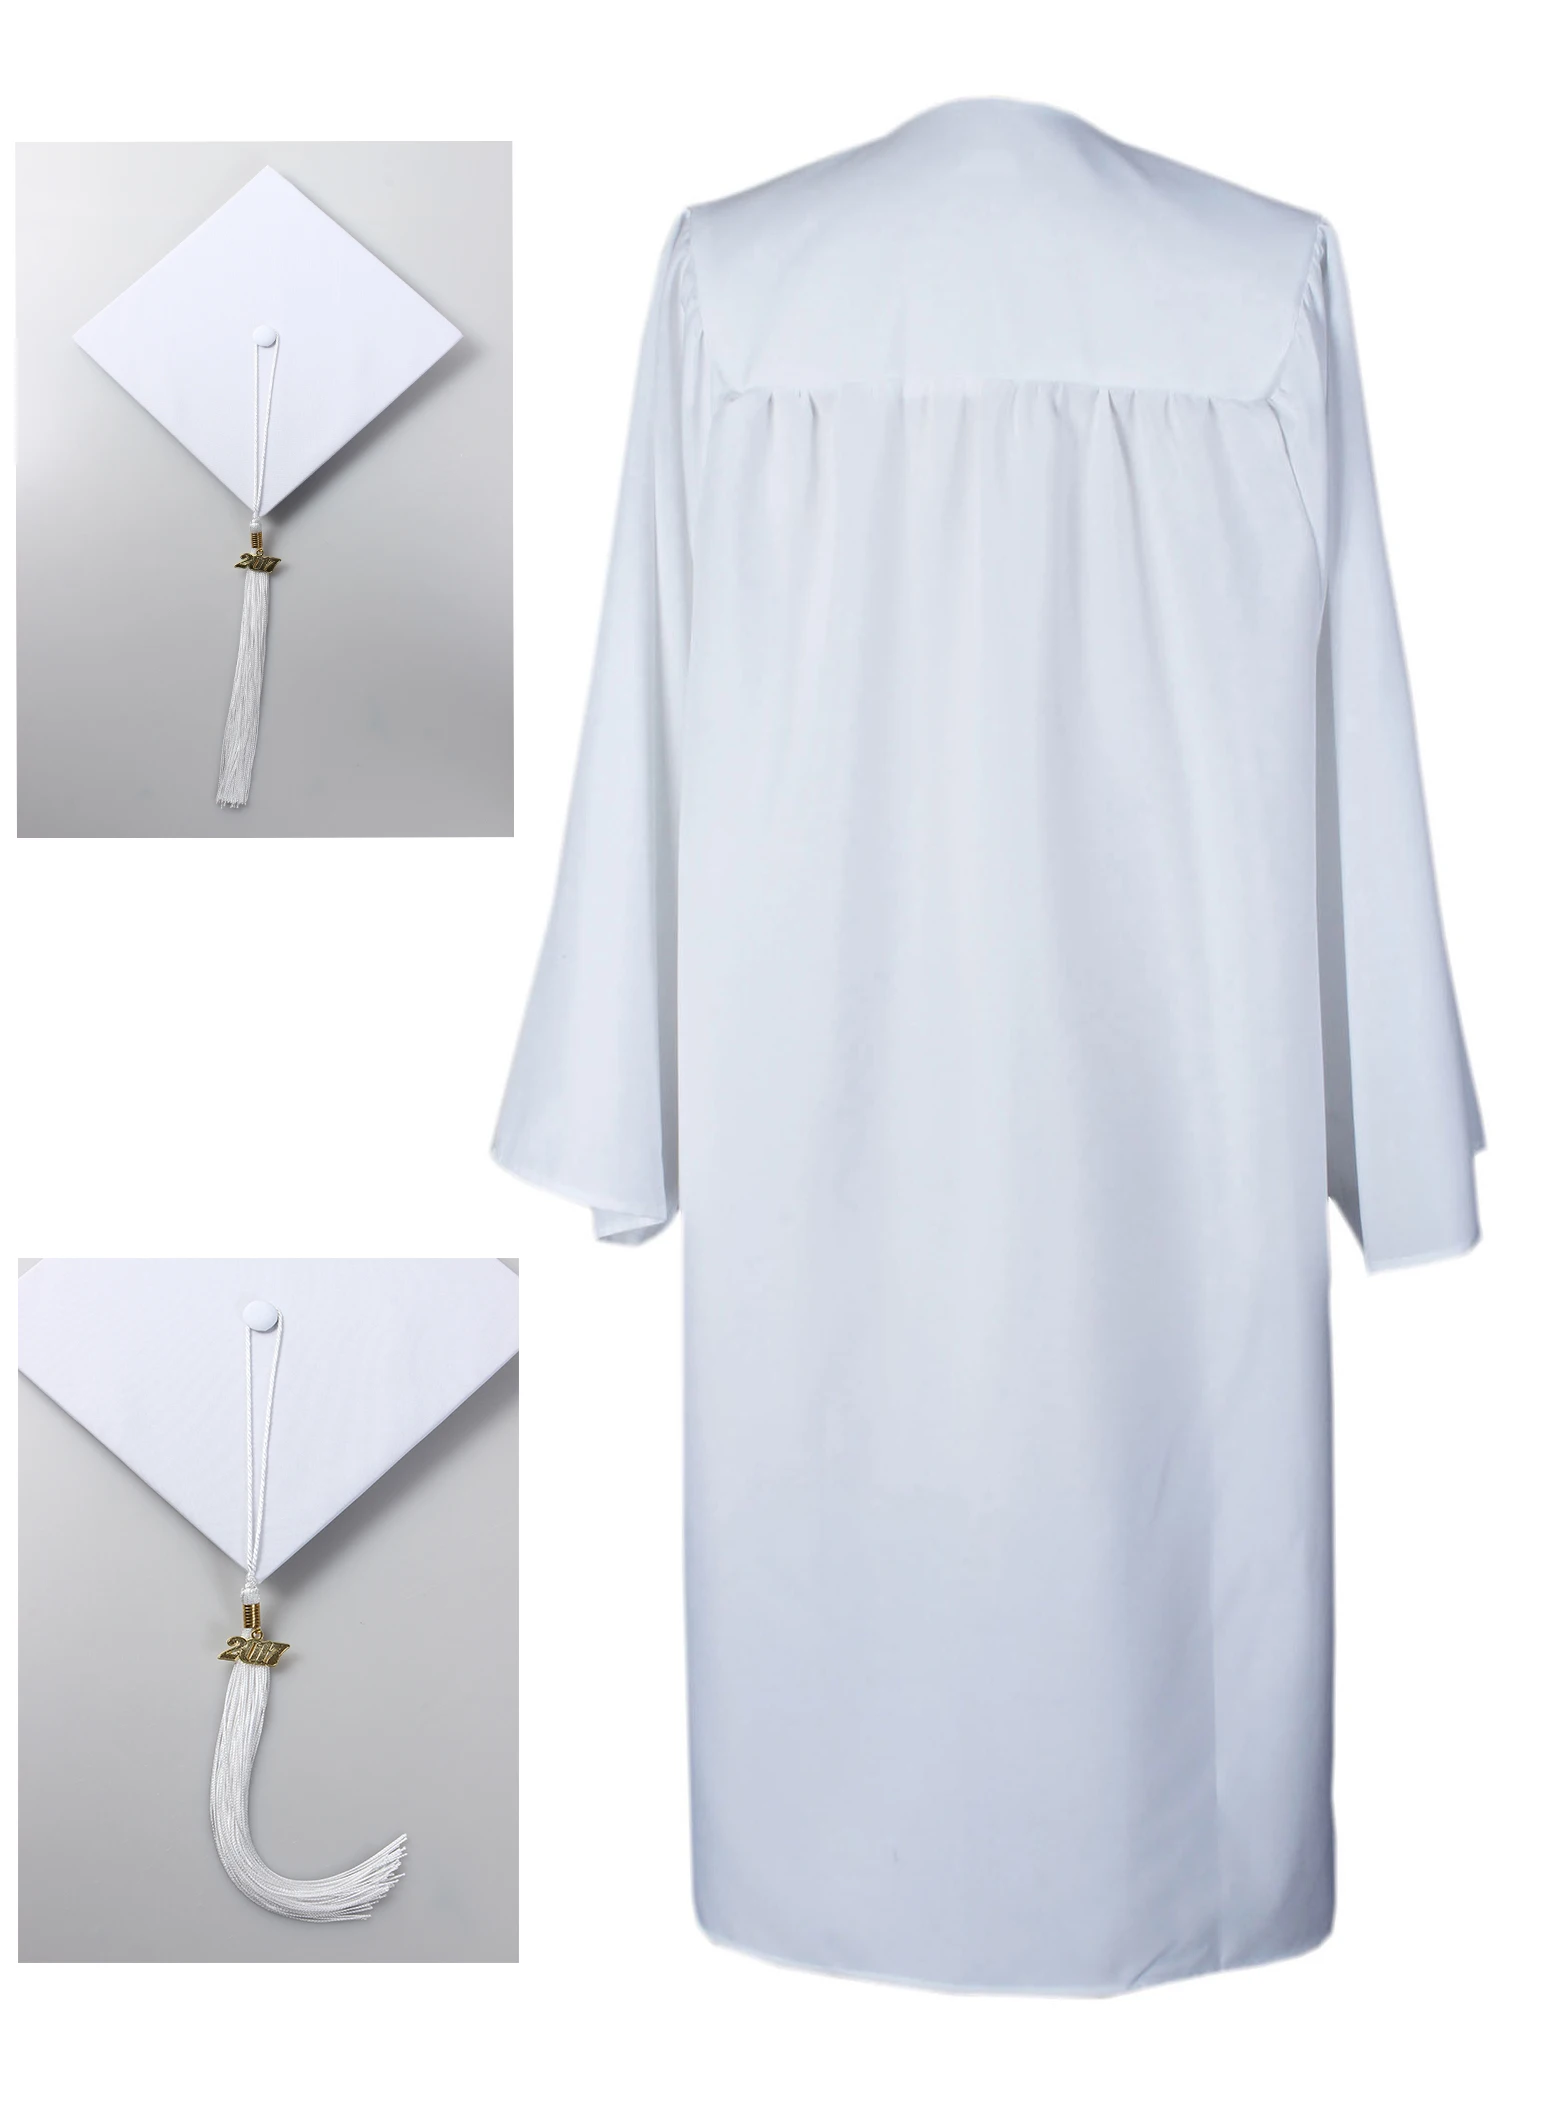 Wholesale Popular Adult Graduation White Caps And Gowns - Buy ...